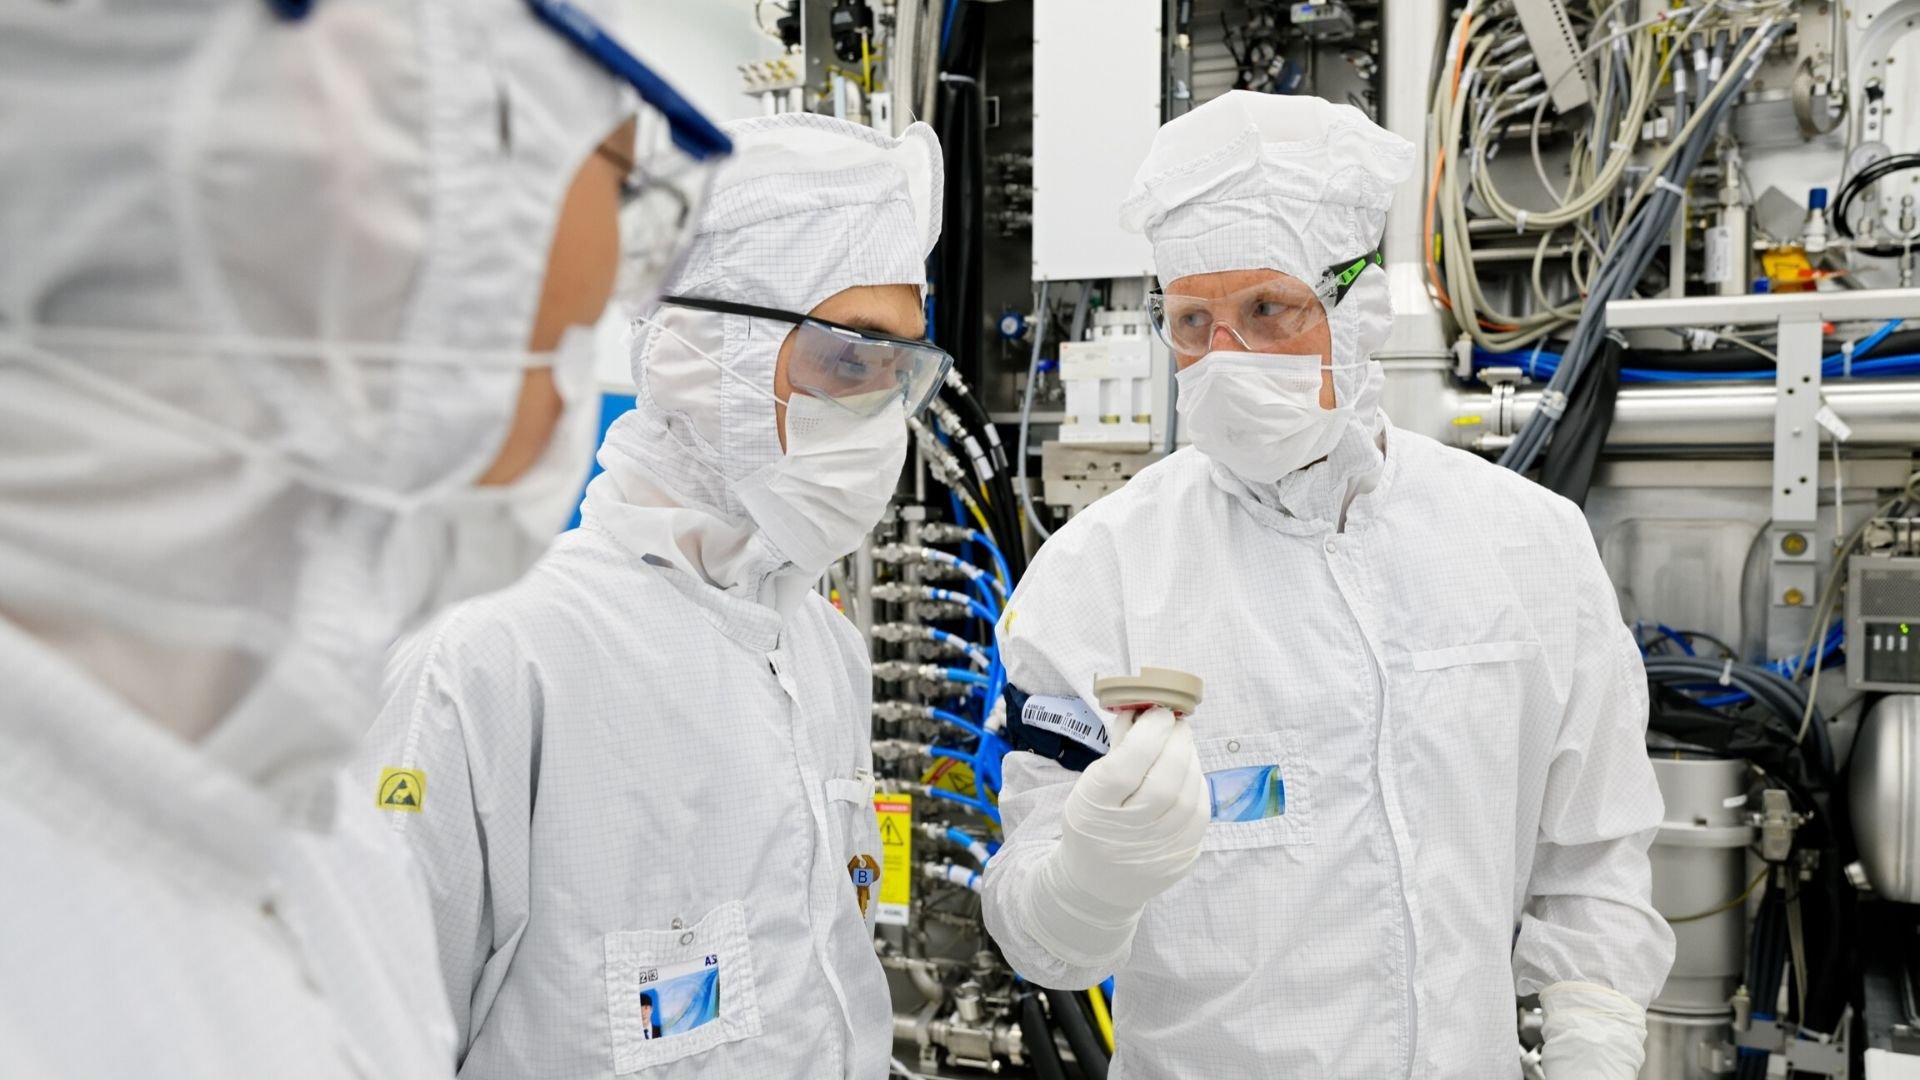 Technicians discuss inside ASML's EUV factory cleanroom in Veldhoven, the Netherlands